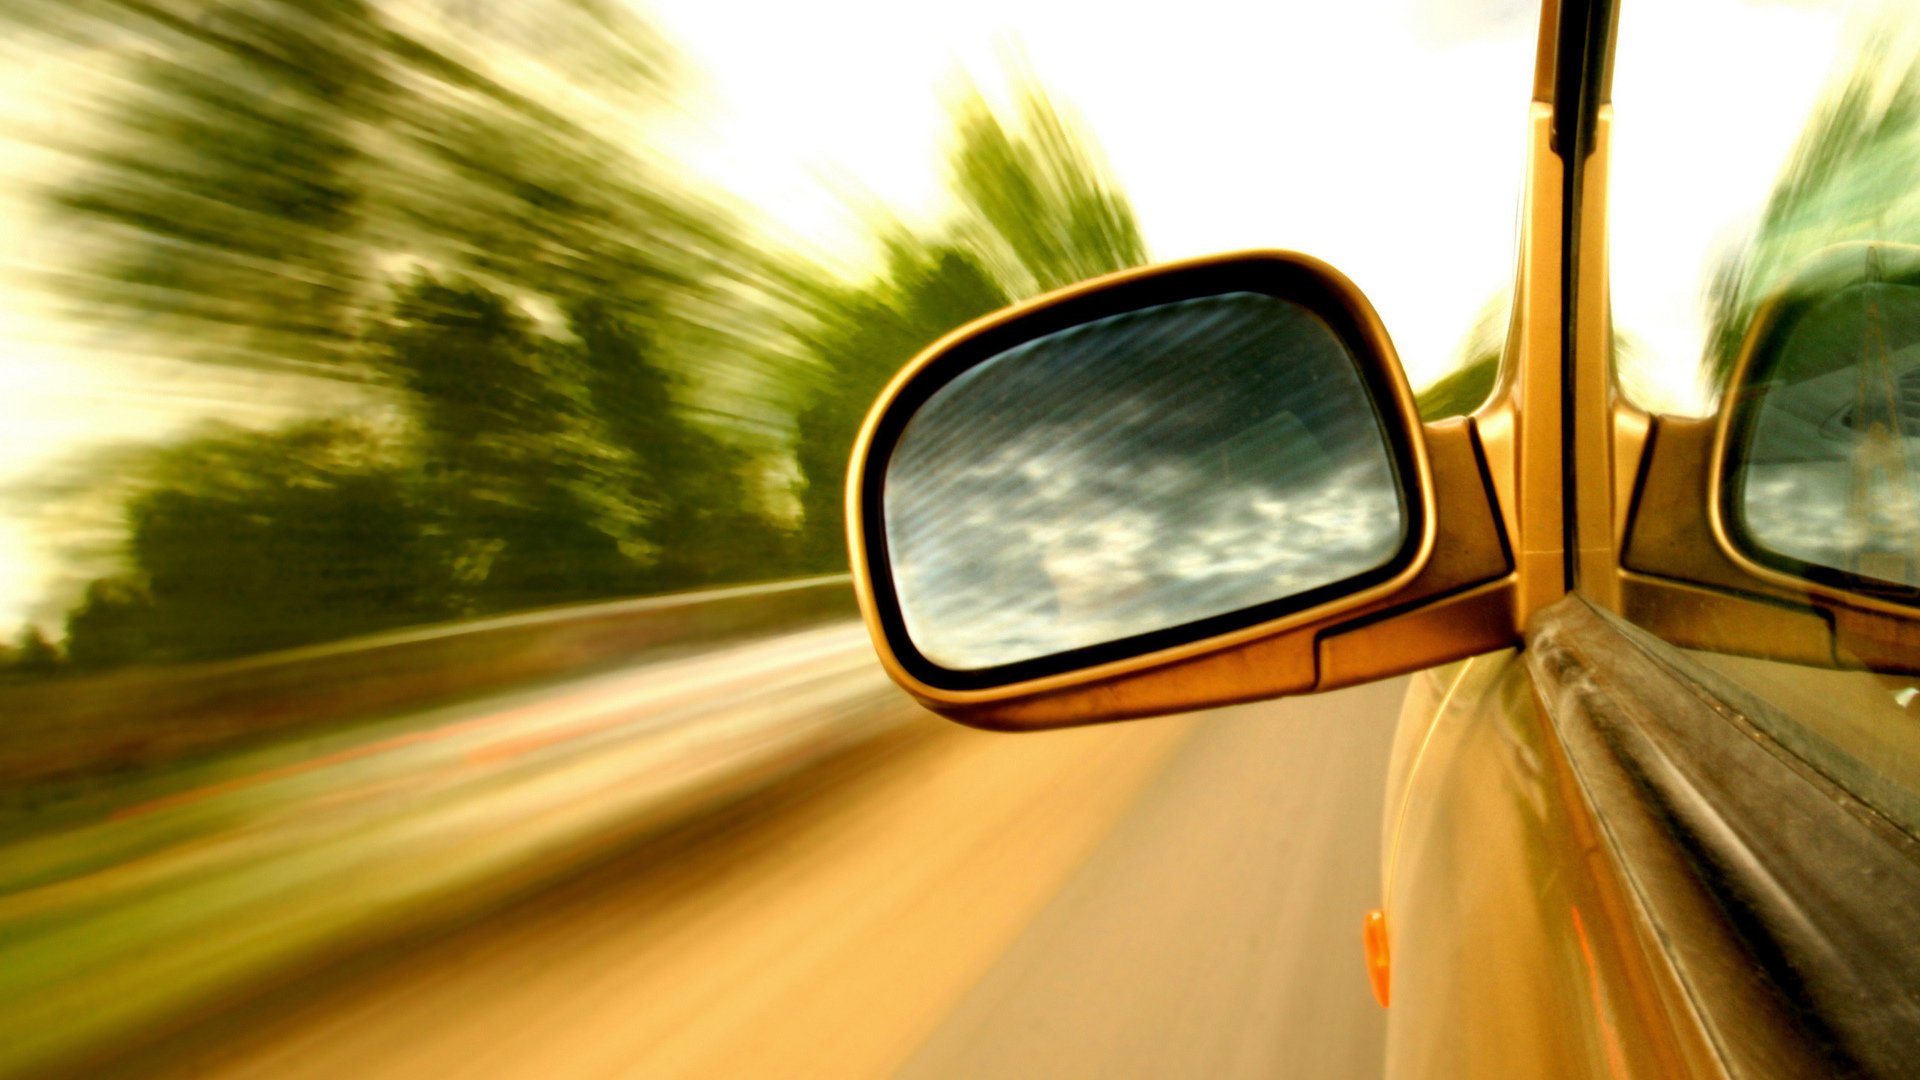 mirror, Car, Side view, Reflection, Clouds, Road, Lines, Motion blur Wallpaper